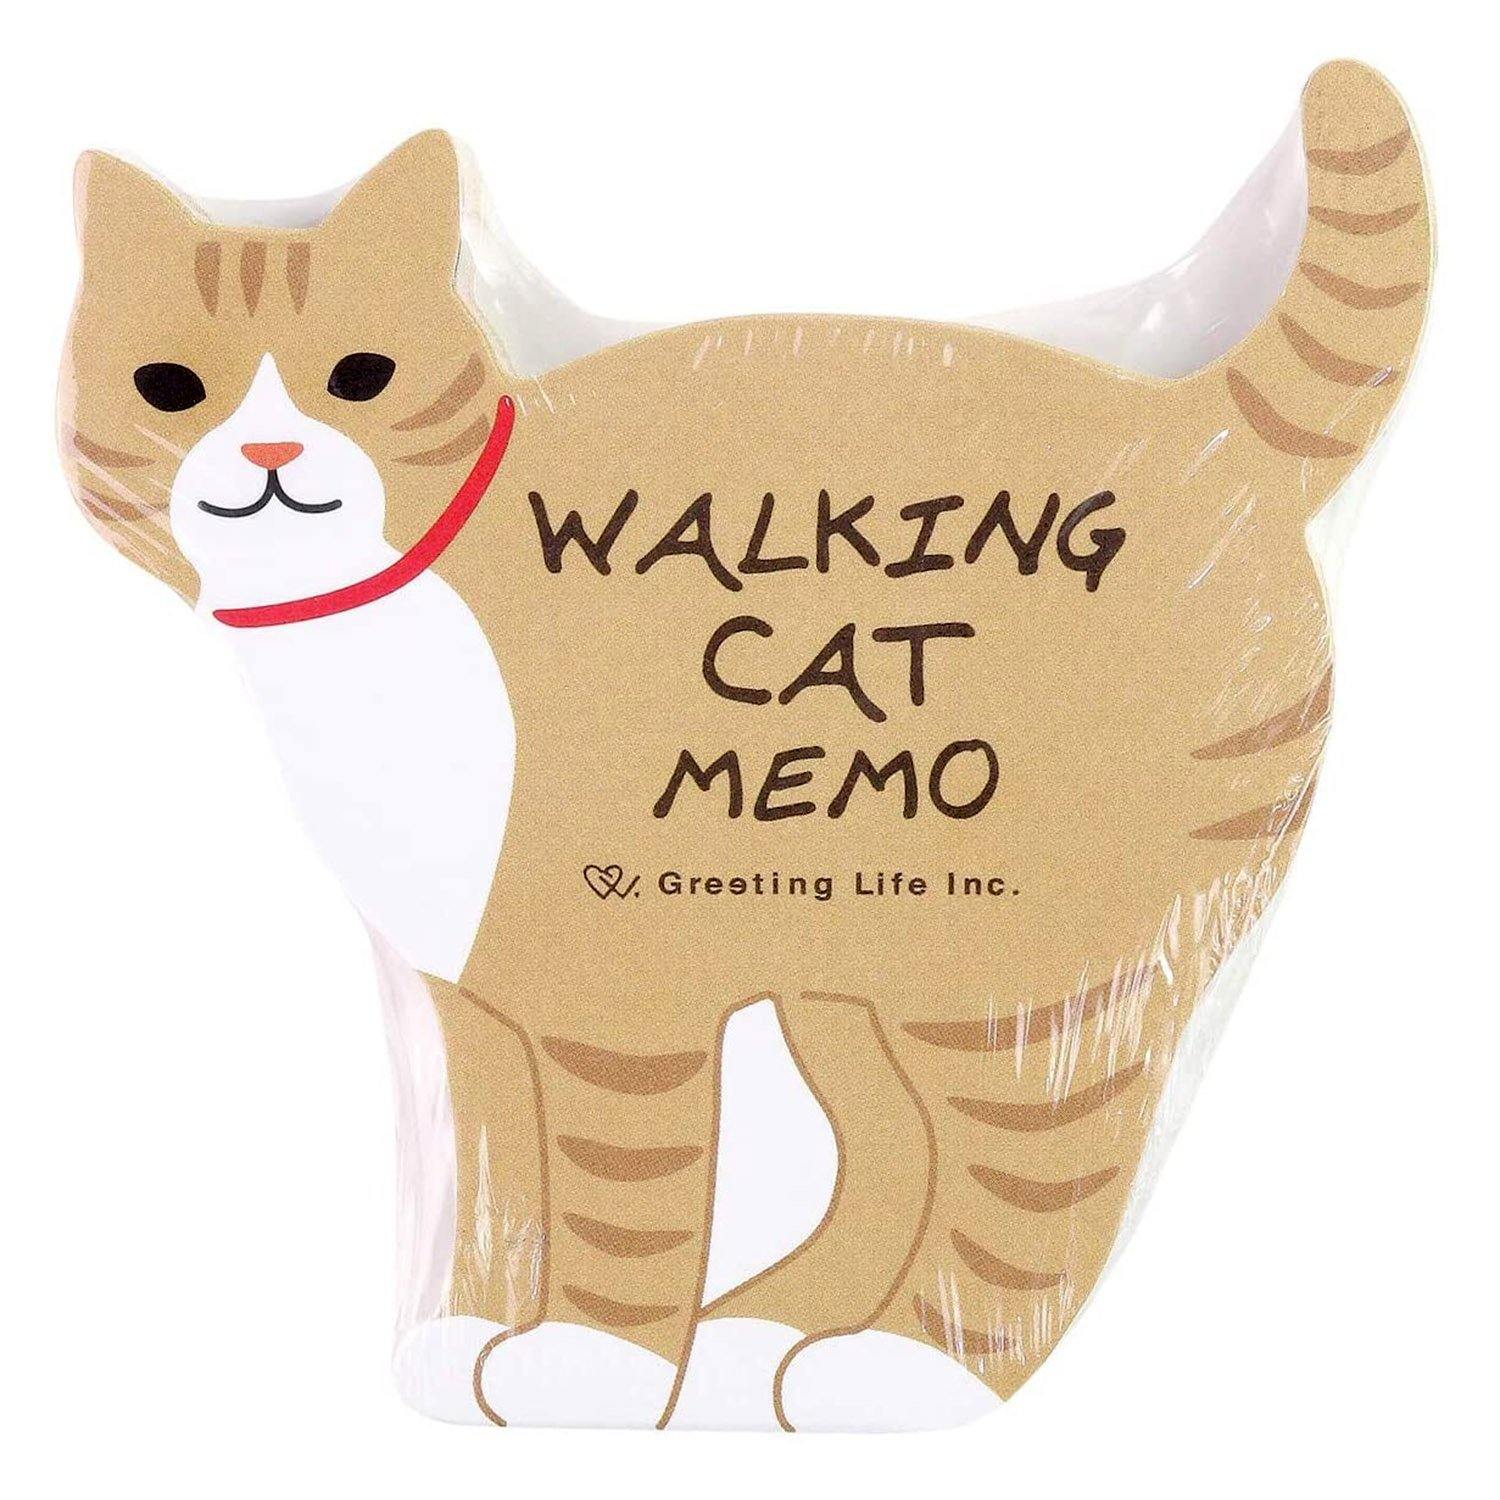 Greeting Life Memo Pad - Die Cut Brown Cat | papermindstationery.com | Animal, boxing, Cat, Greeting Life, Memo Pads, Paper Products, sale, Stationery